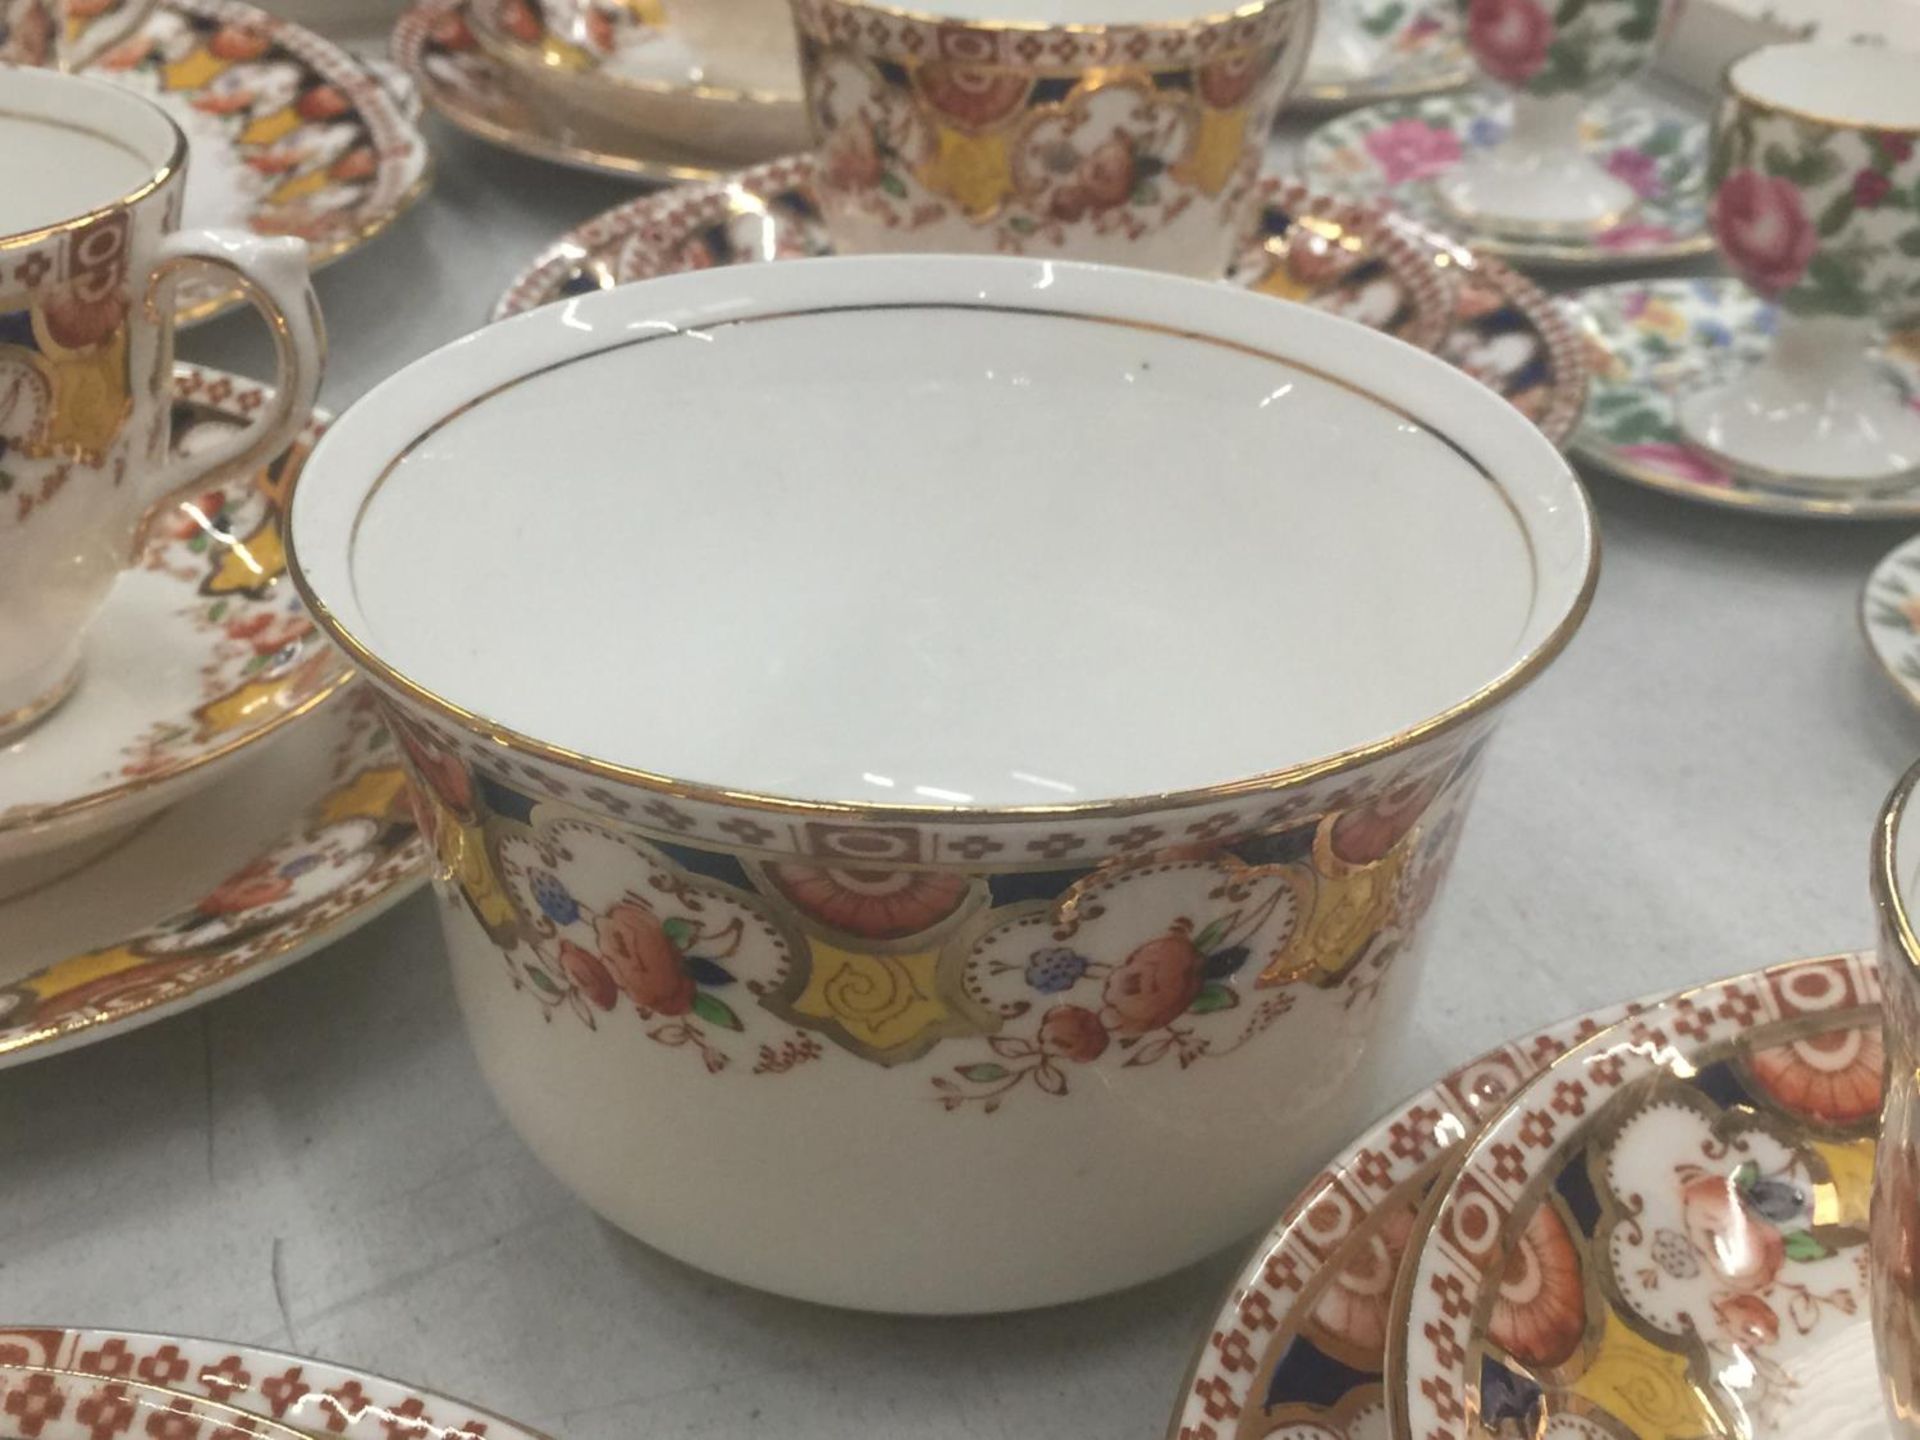 A QUANTITY OF SALISBURY CHINA 'TYNE' TO INCLUDE CAKE PLATE, CUPS, SAUCERS, SIDE PLATES AND A SUGAR - Image 3 of 6